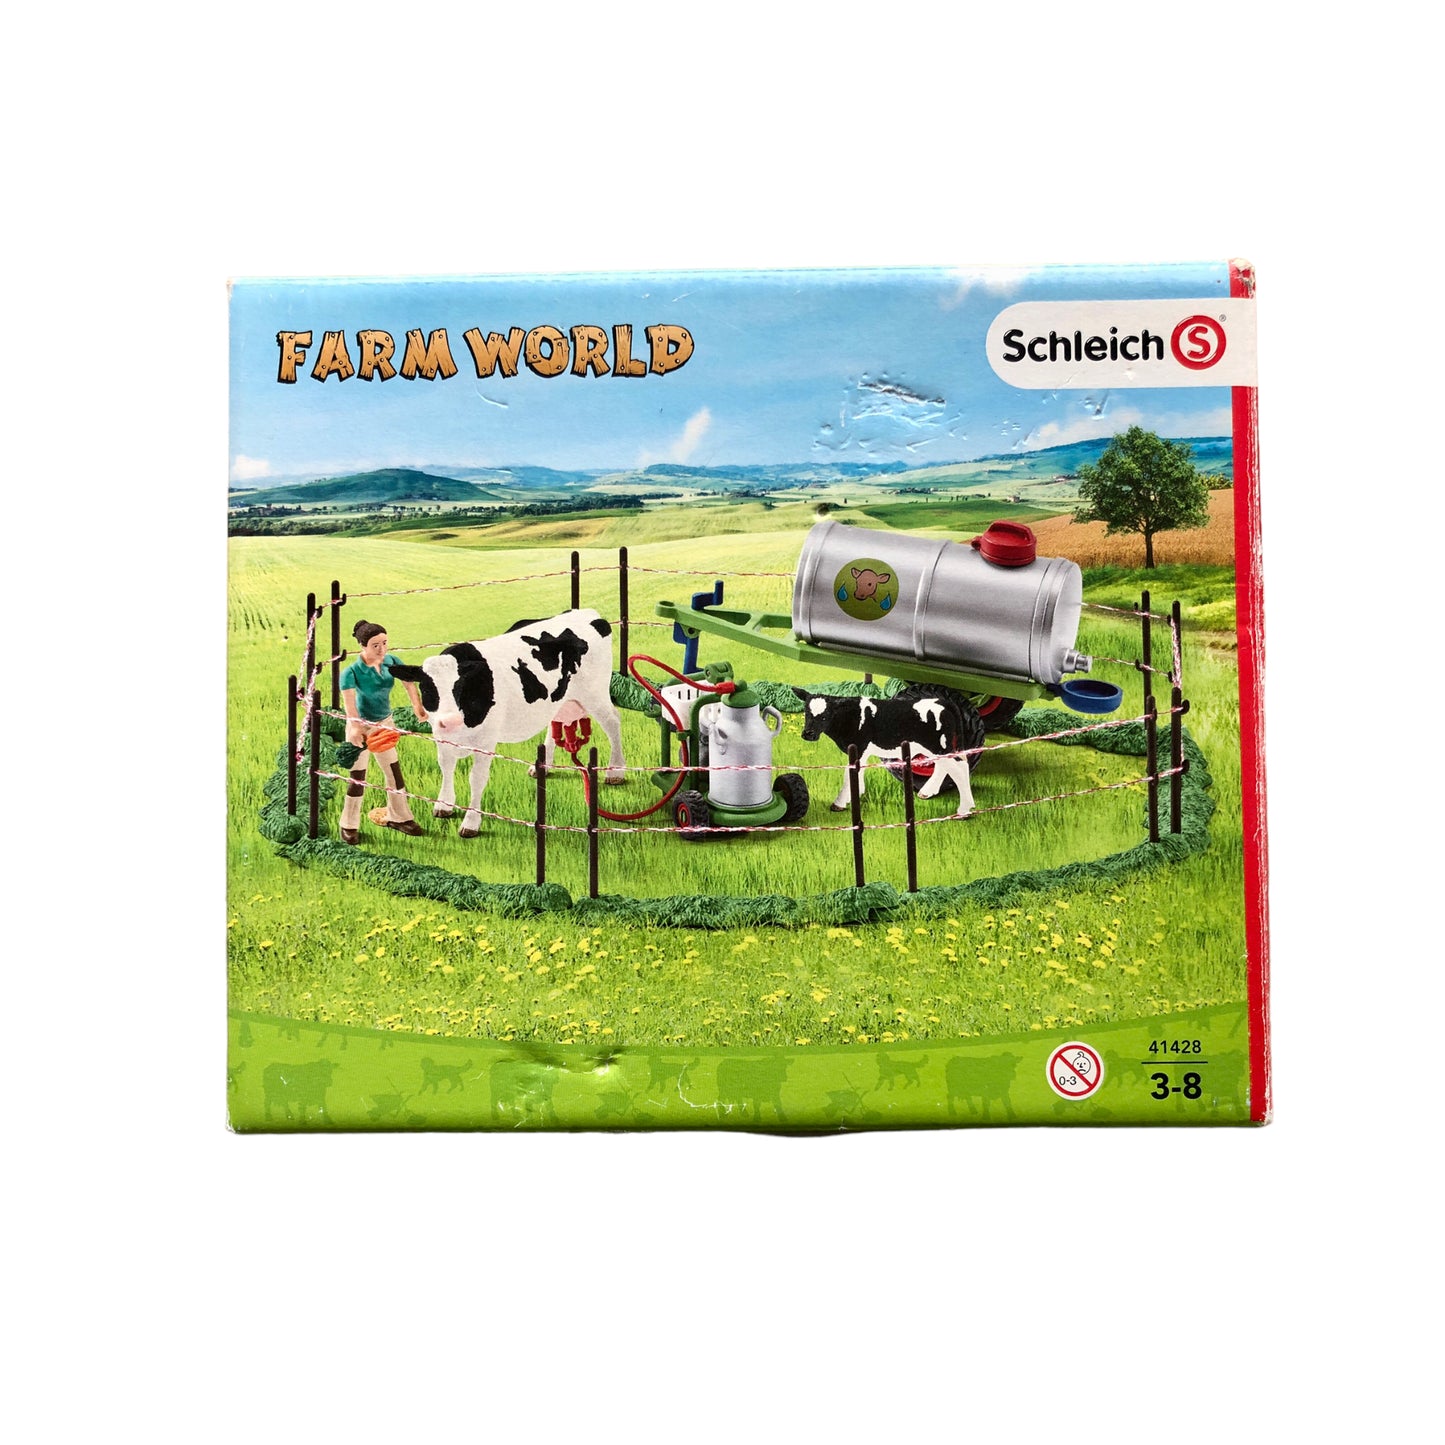 Schleich - Farm World, 41428 - Cow family on the pasture